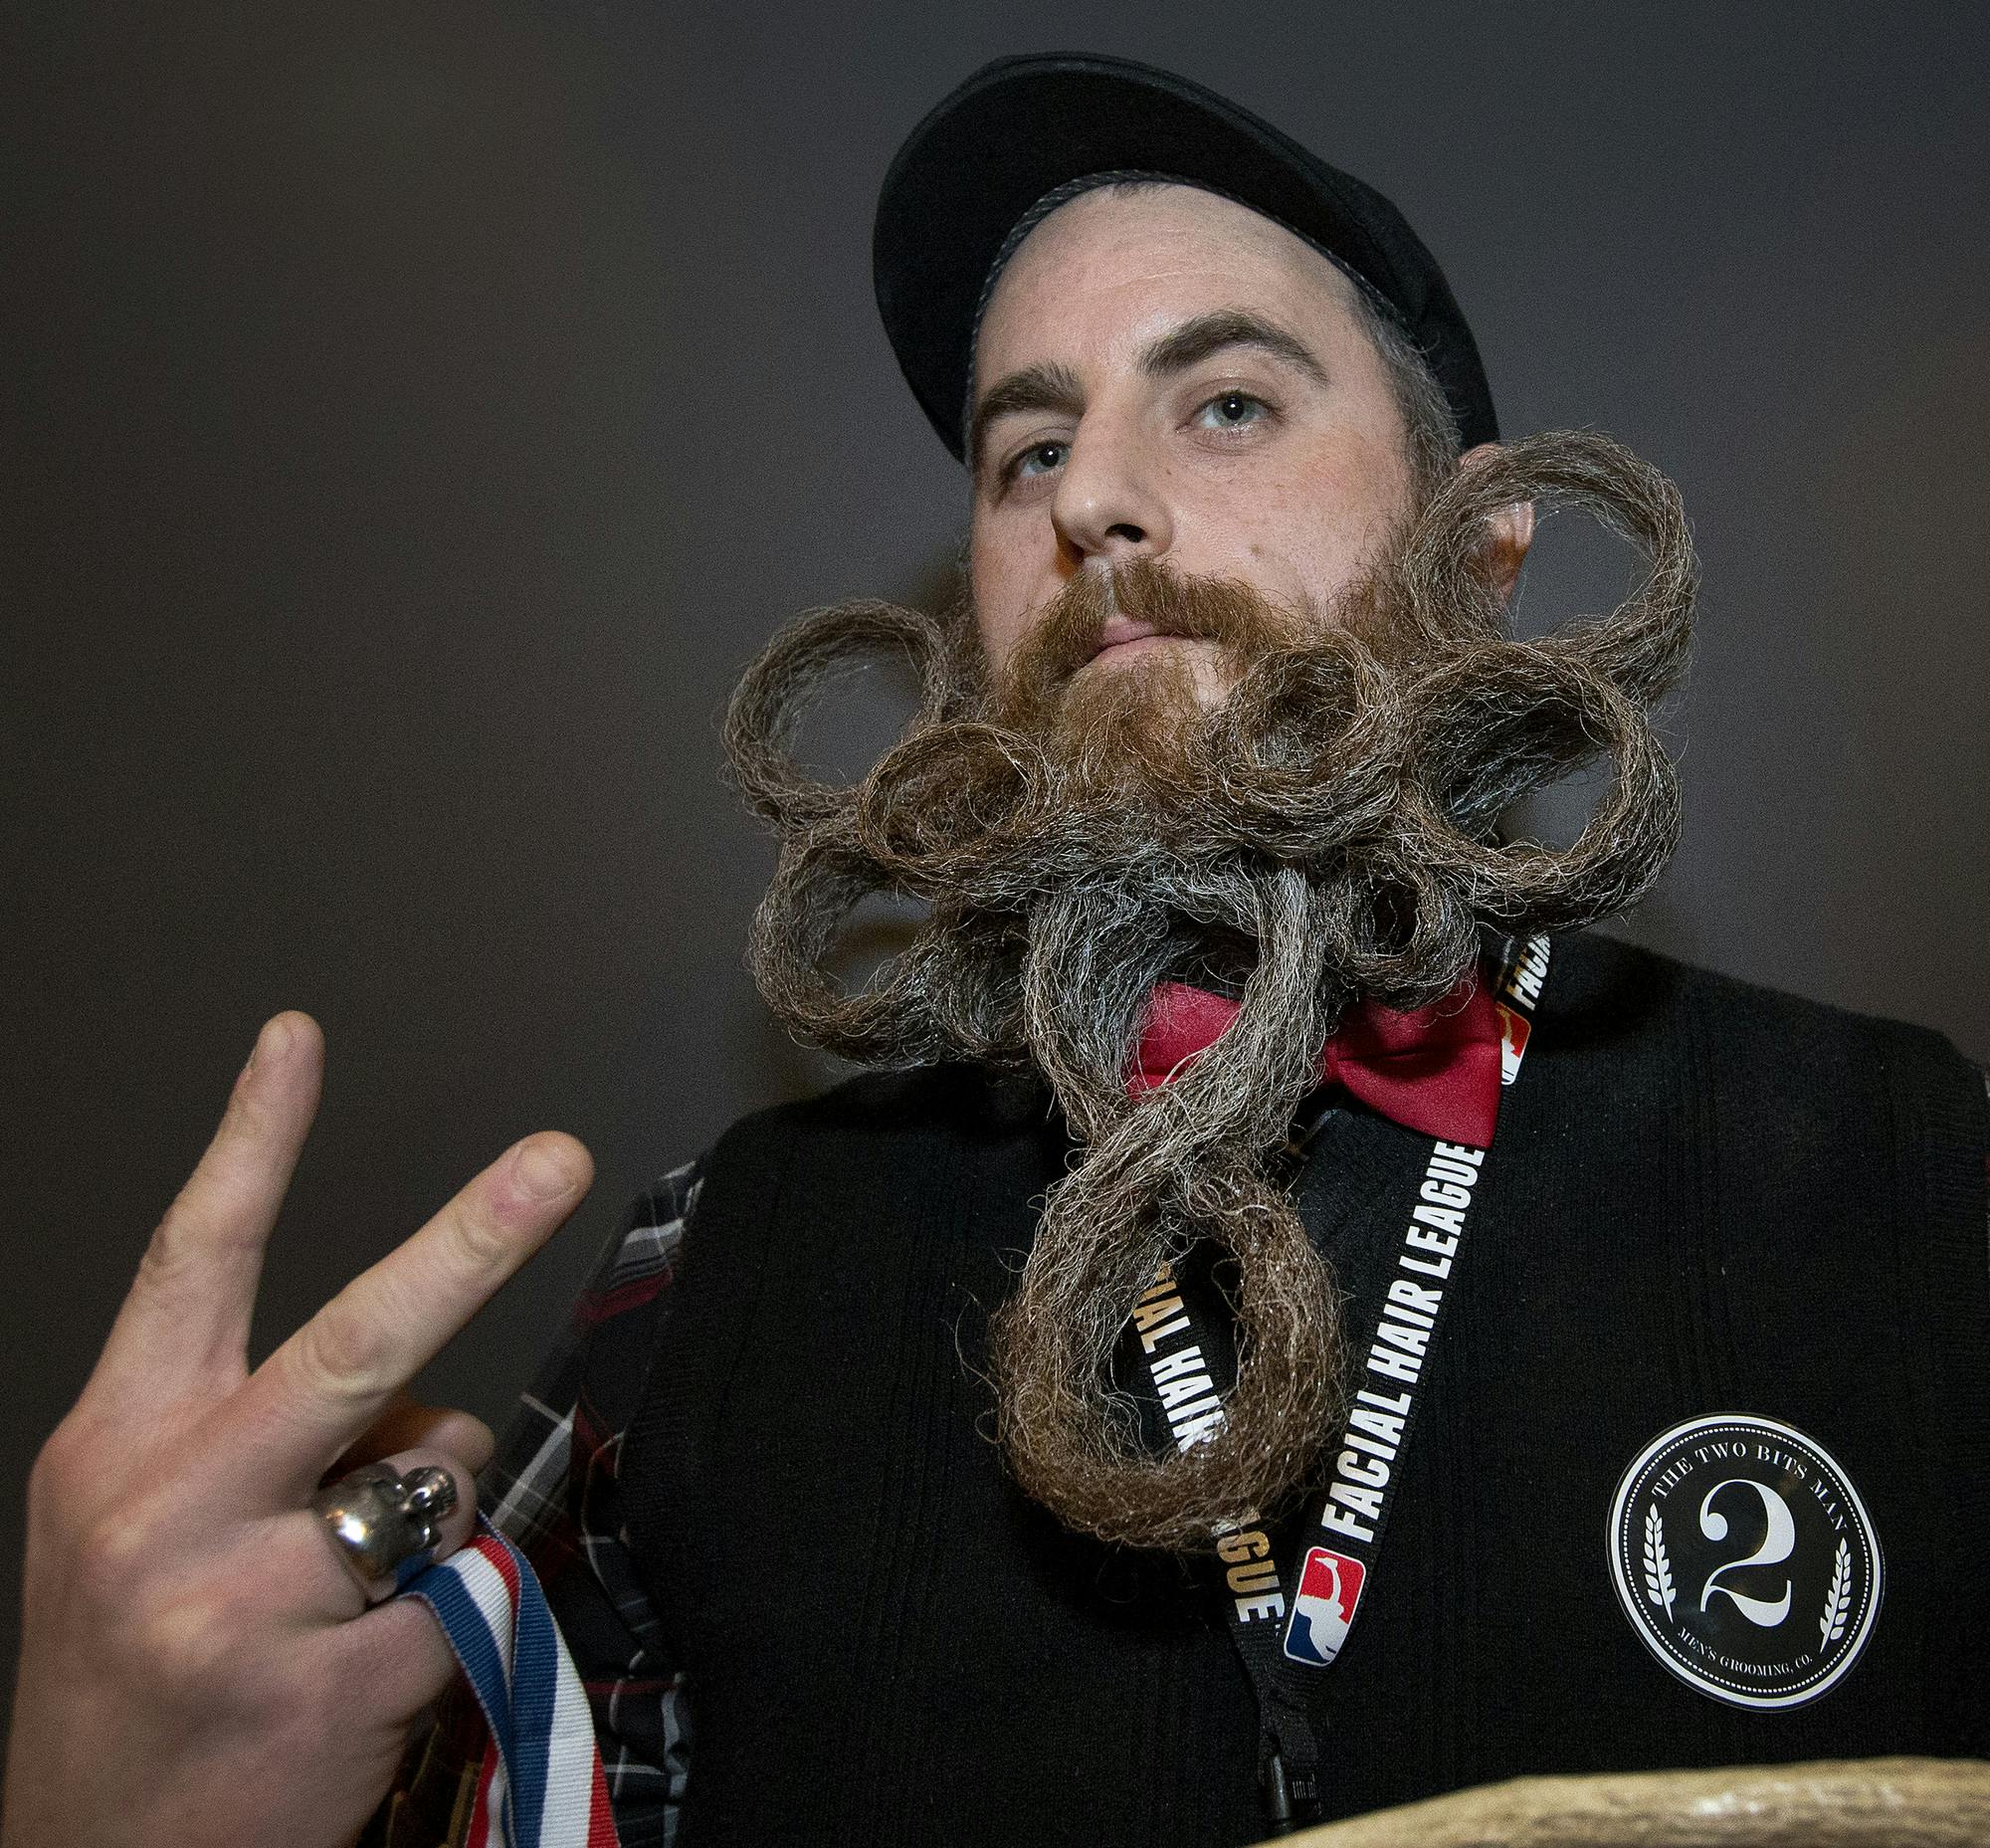 Competition gets hairy at annual beard, mustache contest